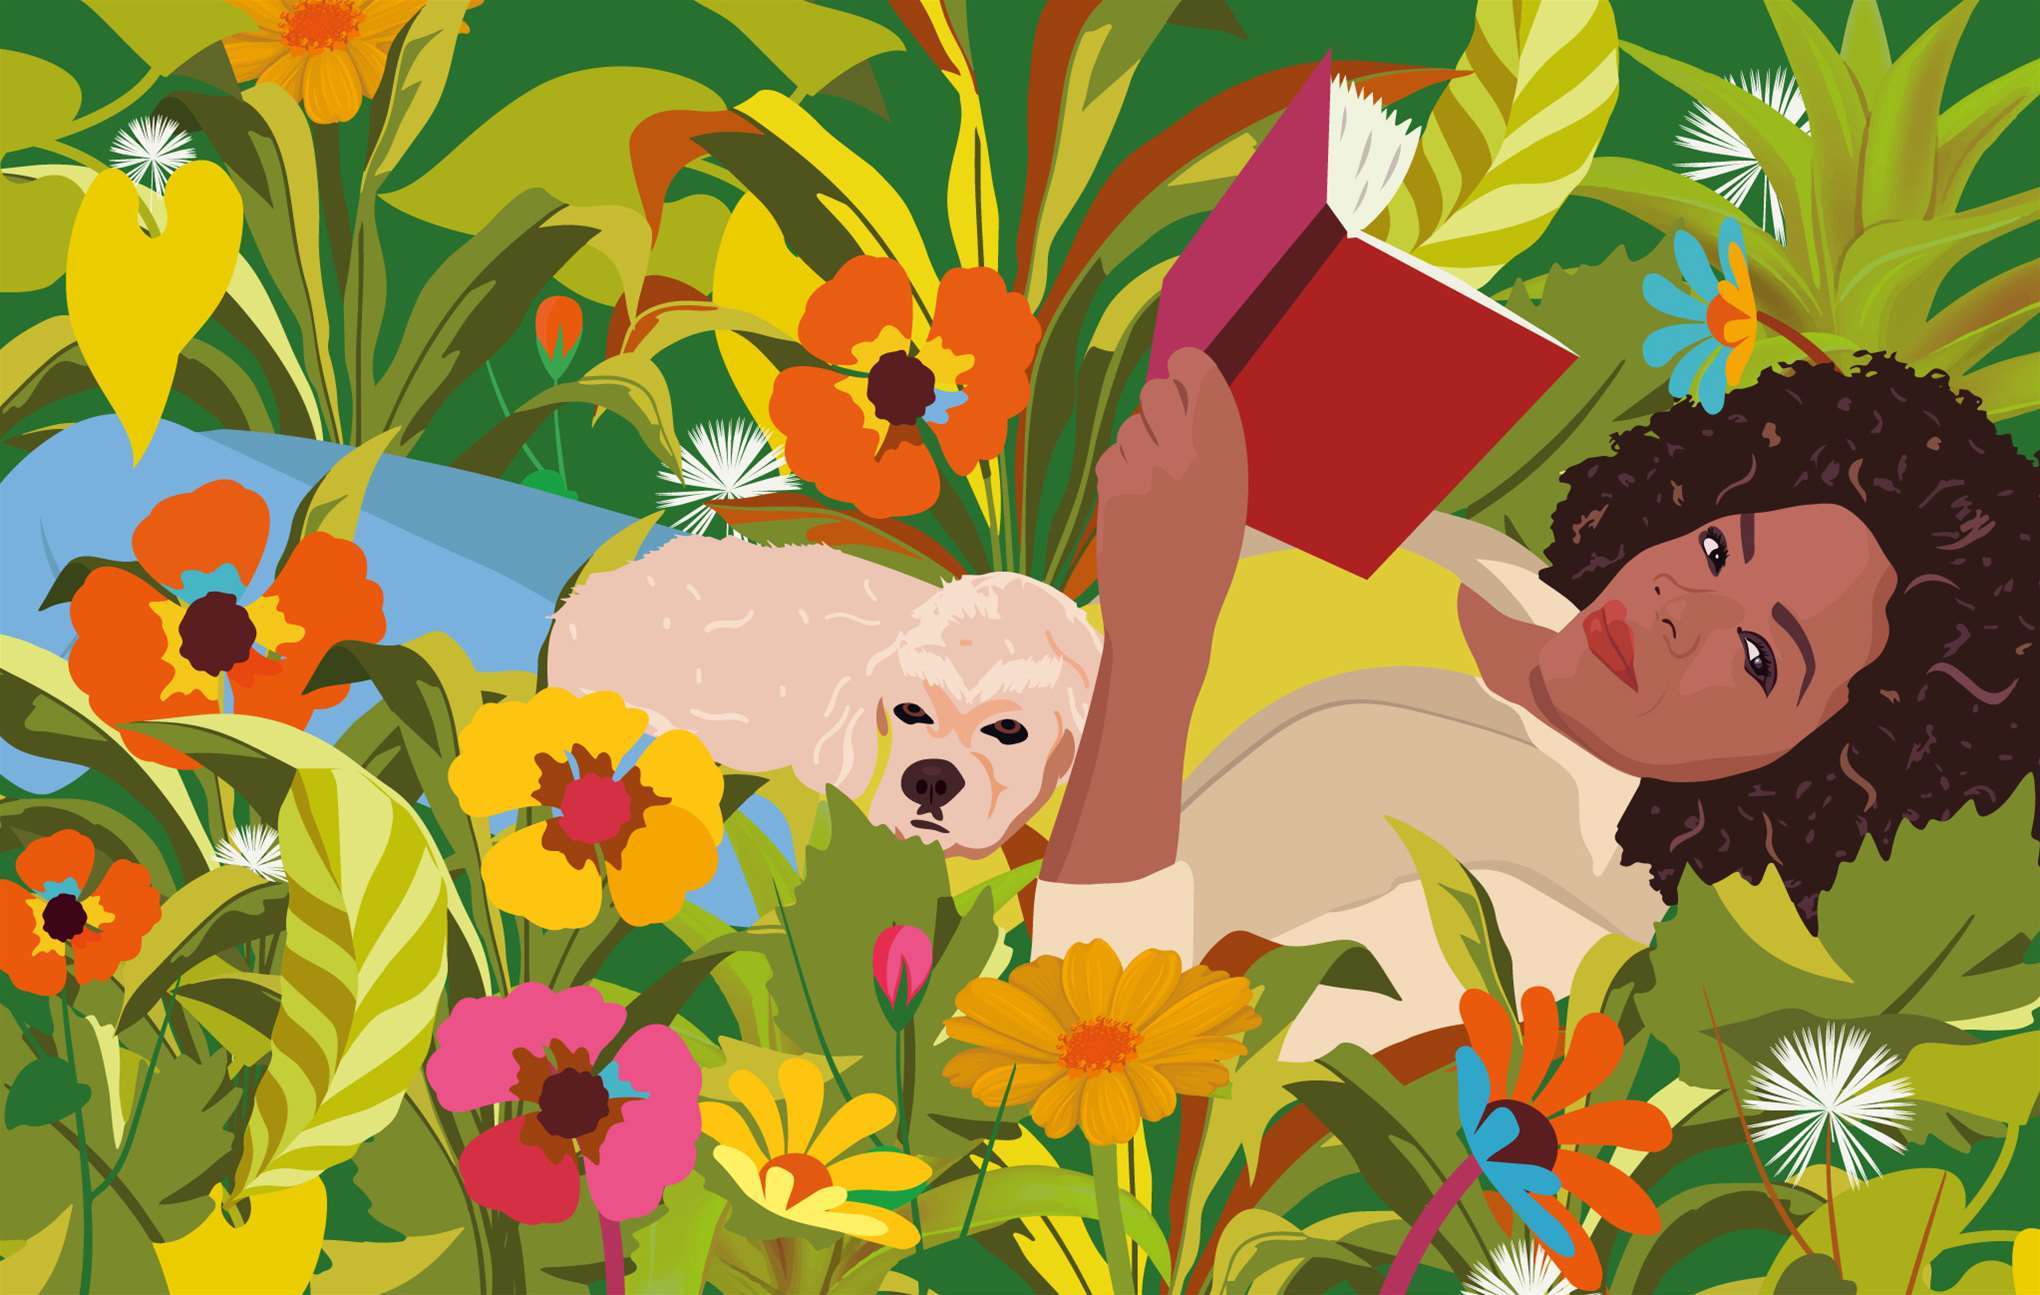 Camila Pinheiro, Bright vector digital illustration of a woman laying in the flowerbed reading a book with a dog on her lap. Vibrant summer floral patterns. 